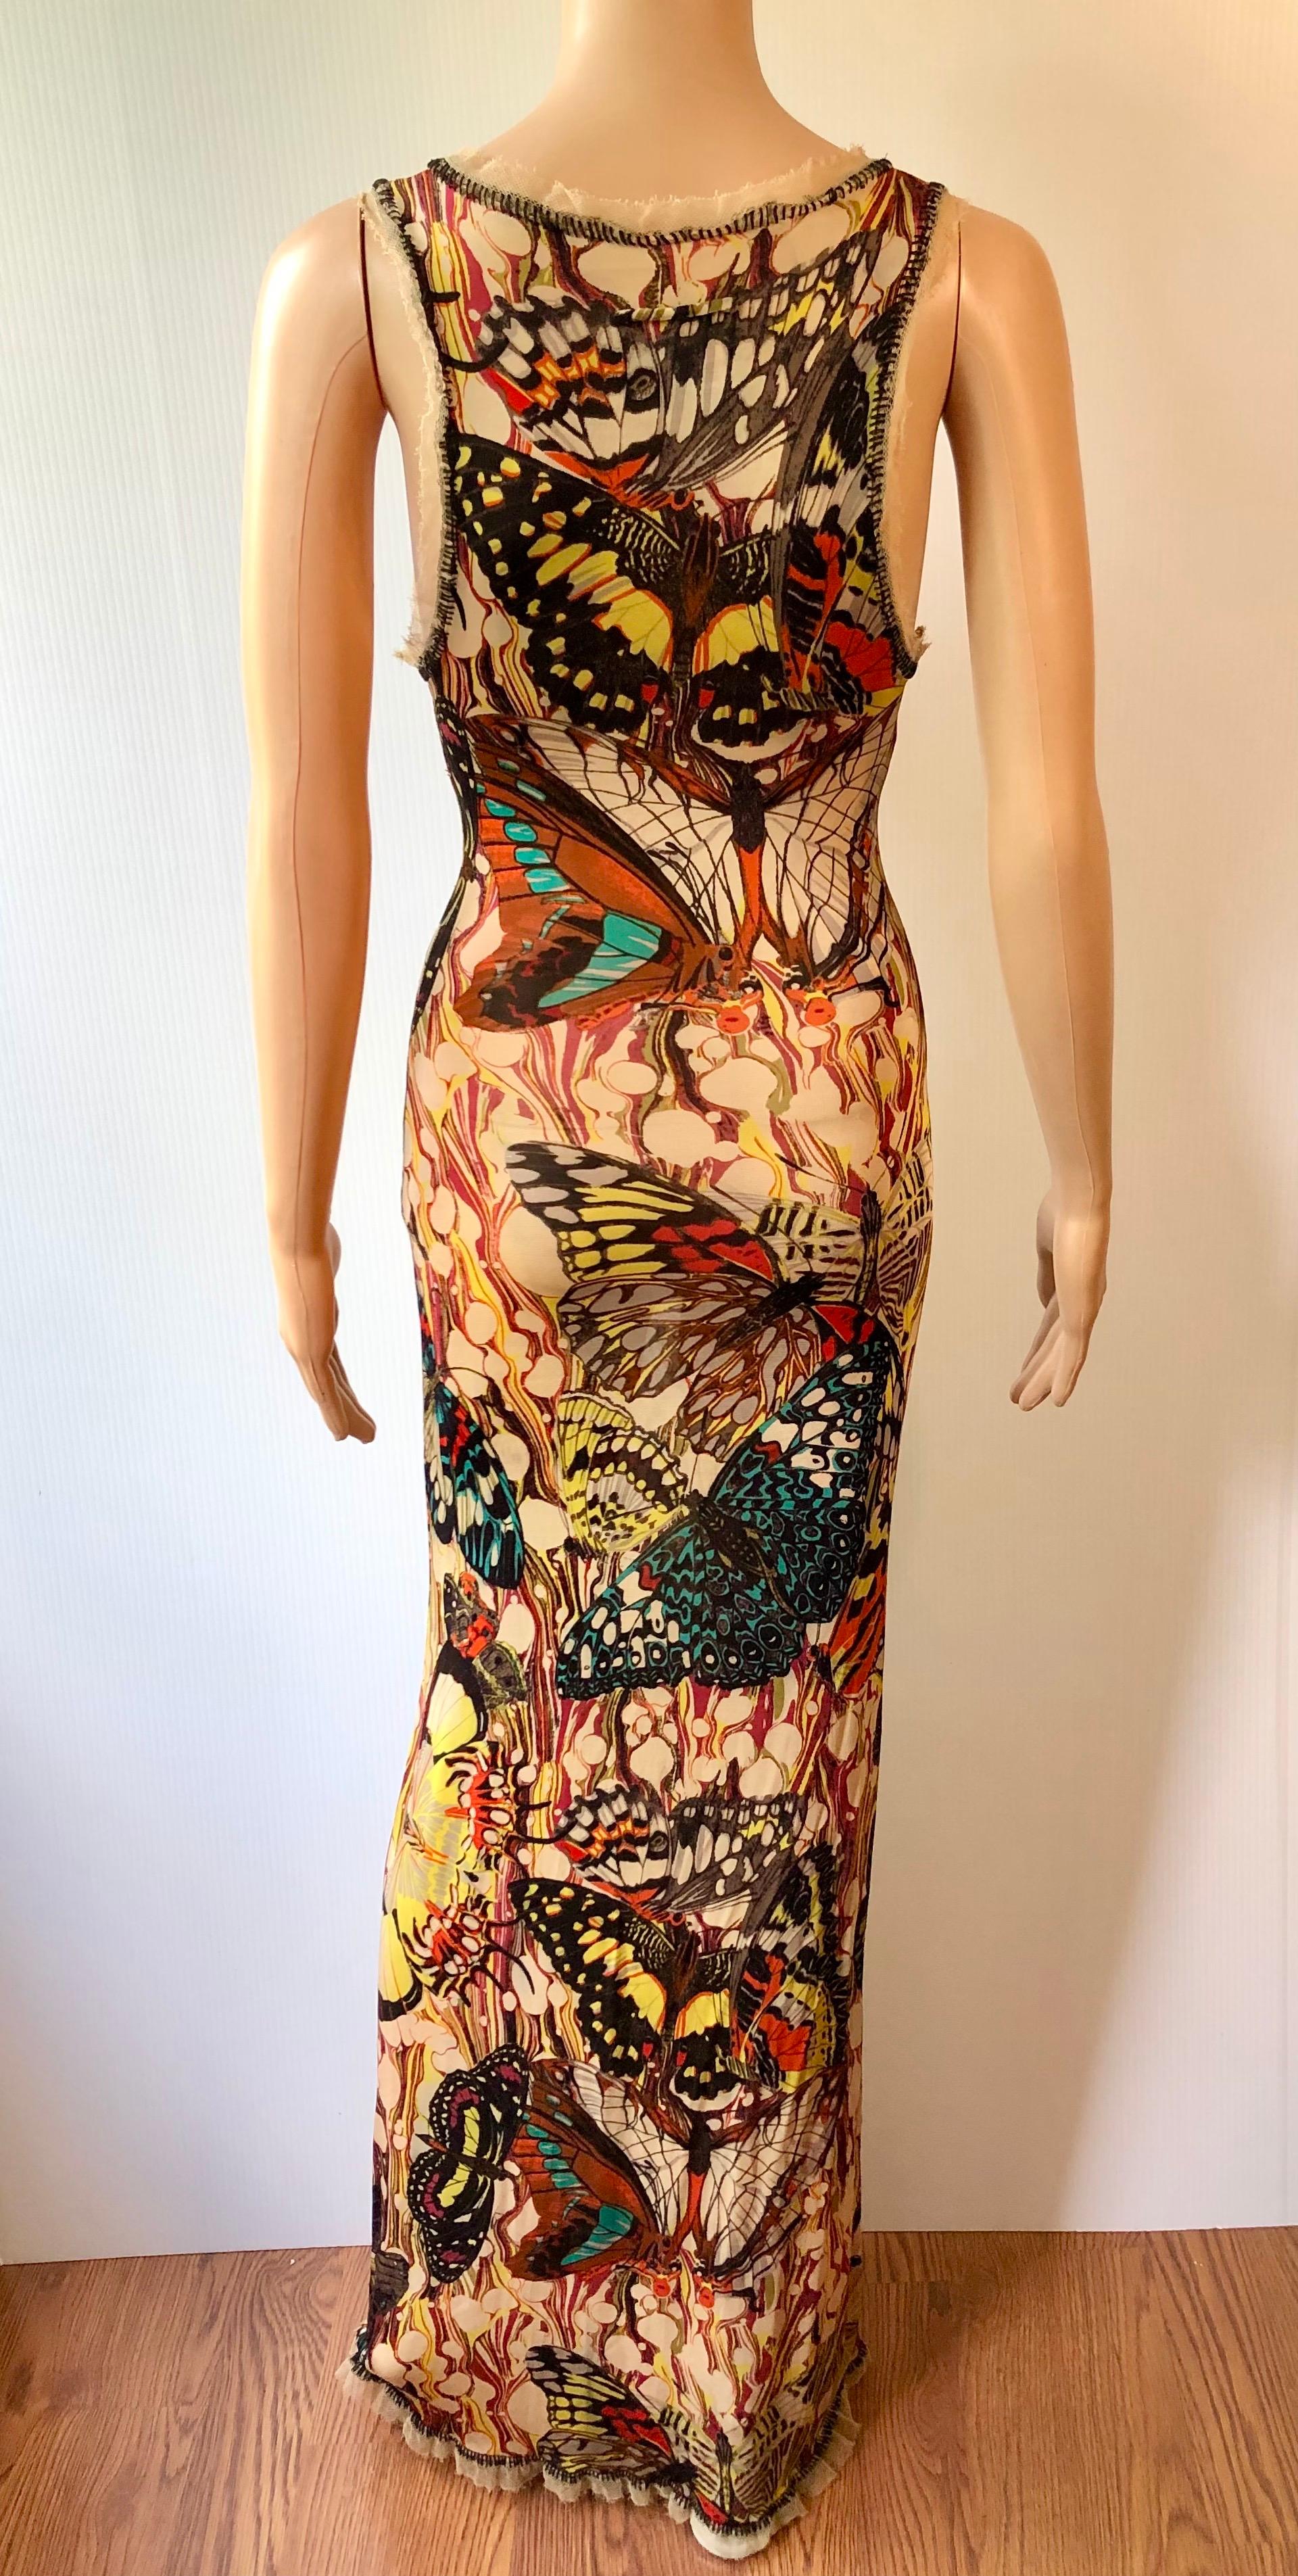 Jean Paul Gaultier Vintage Butterfly Print Lace Up Plunged Bodycon Maxi Dress Size S
